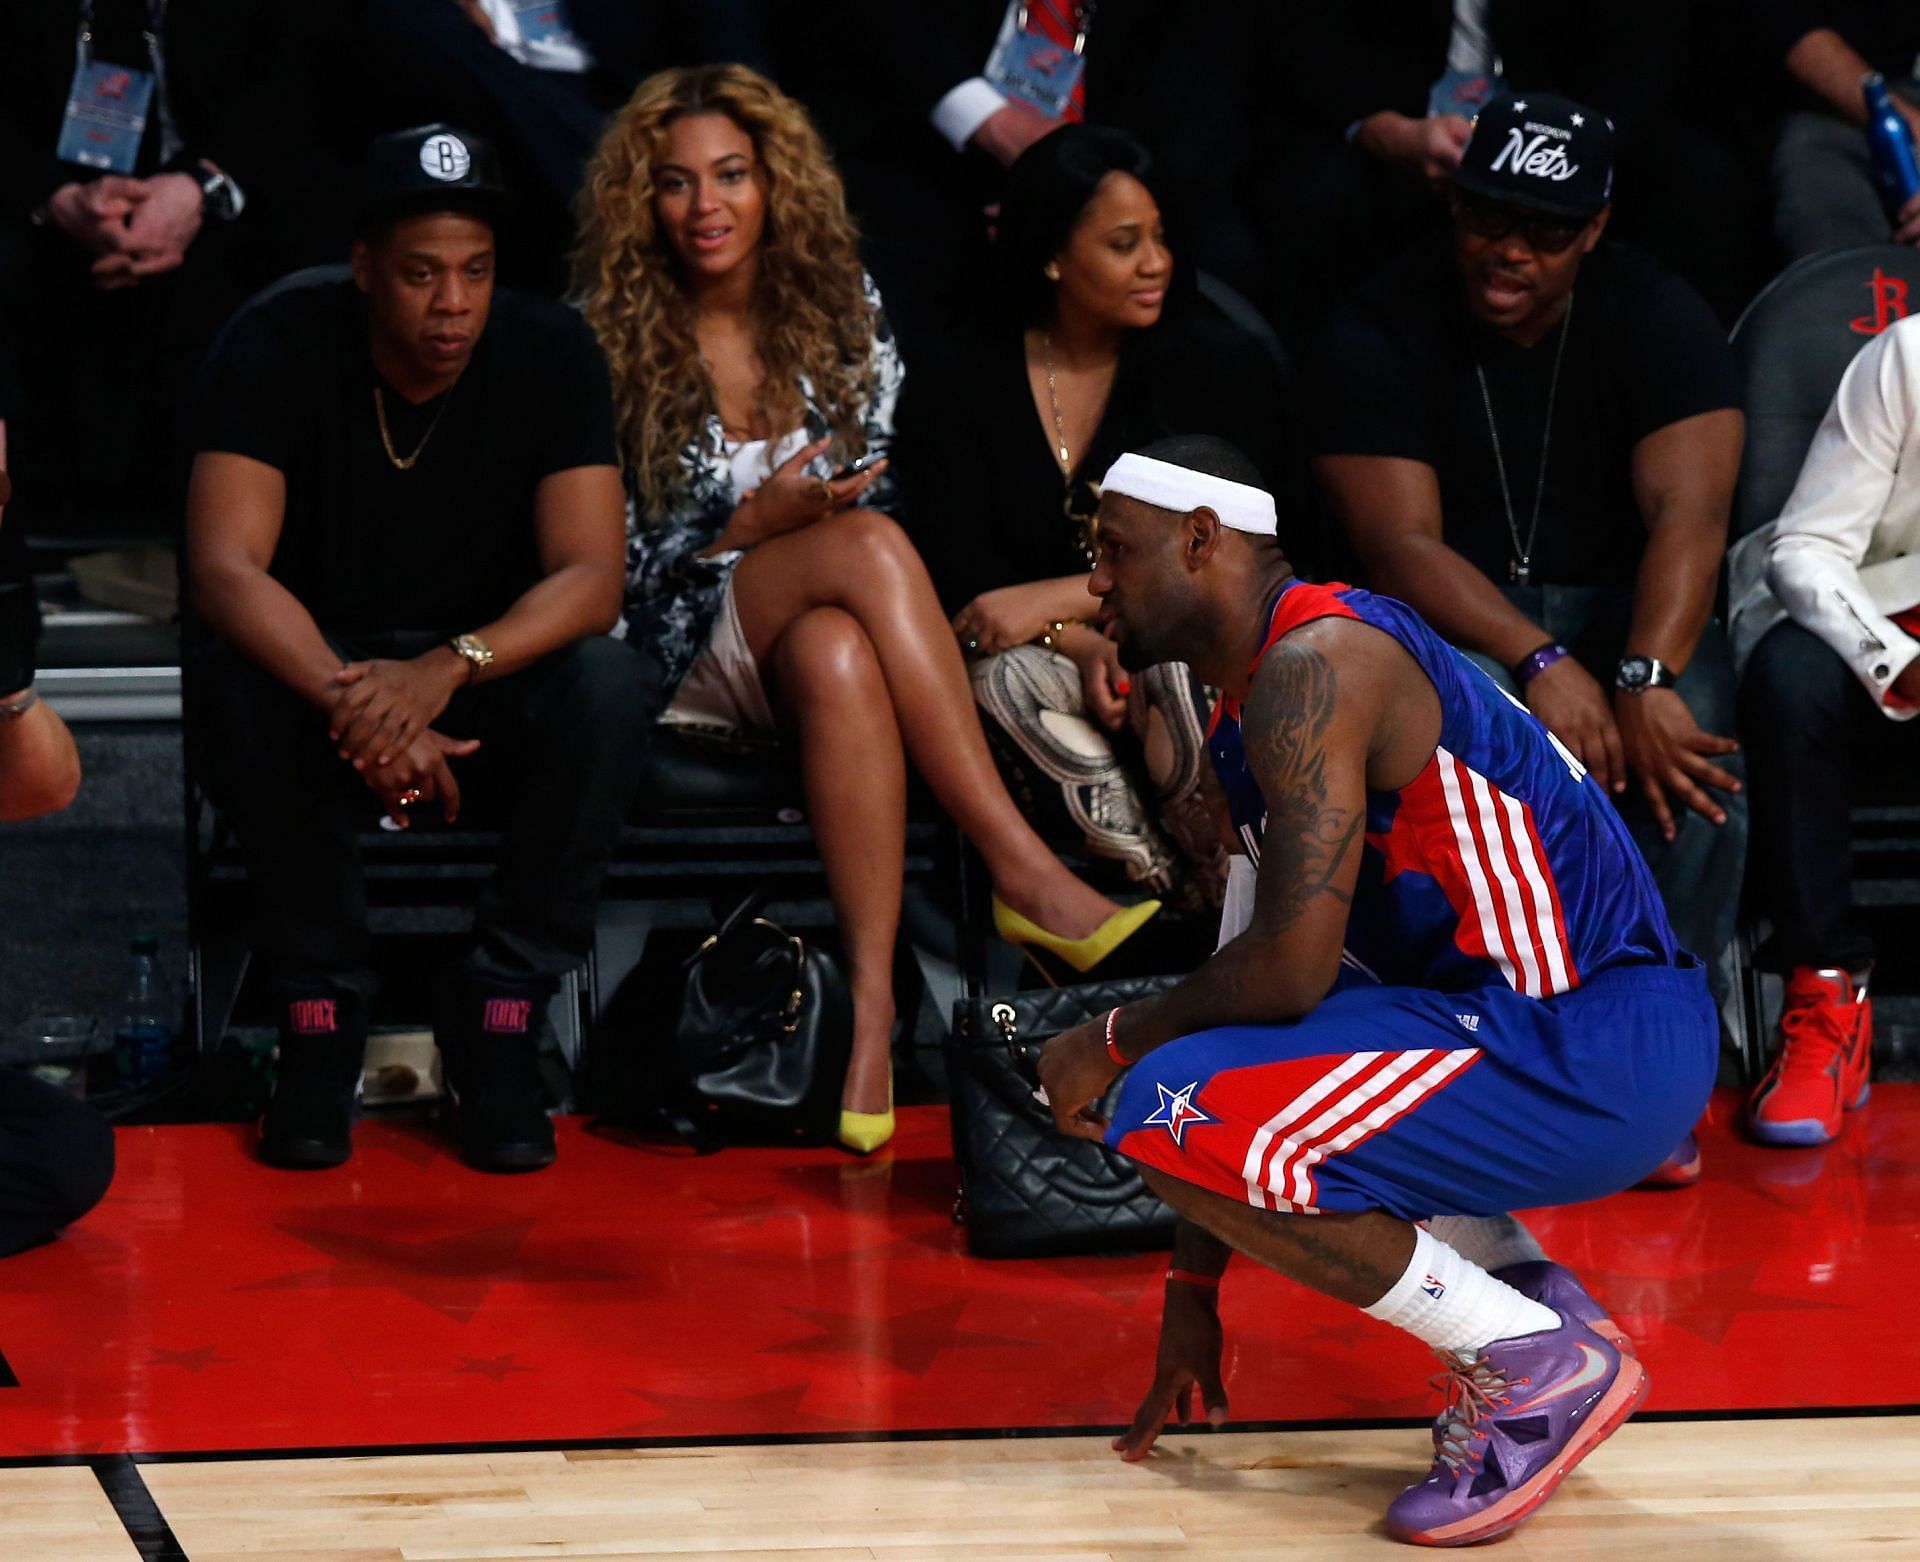 LeBron James with Jay Z and Beyonce at the NBA All-Star Game 2013